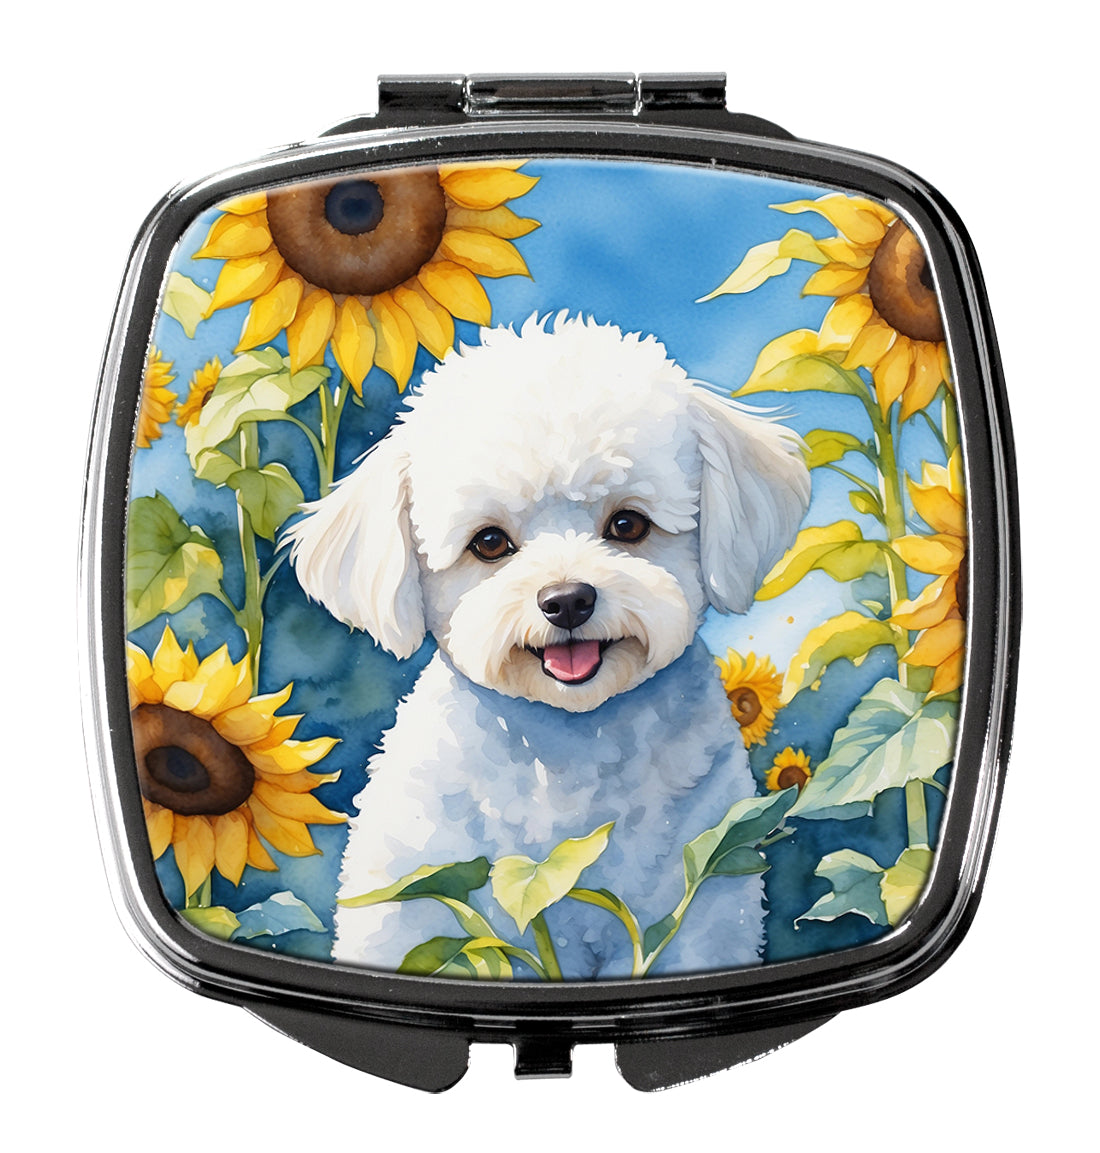 Buy this Bichon Frise in Sunflowers Compact Mirror